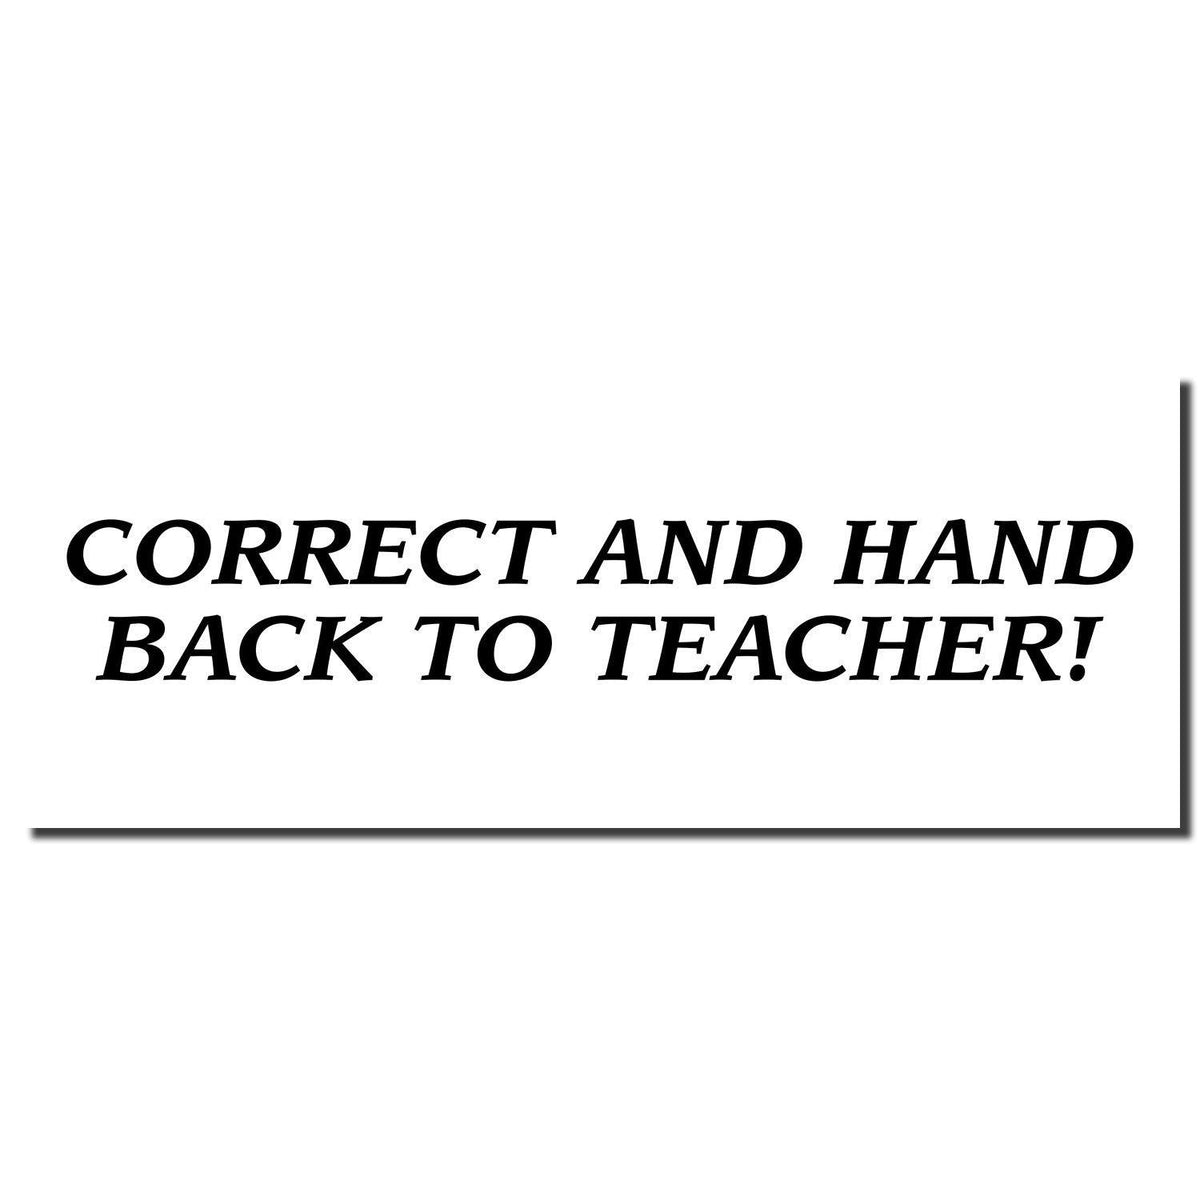 Self Inking Correct And Hand Back Teacher Stamp - Engineer Seal Stamps - Brand_Trodat, Impression Size_Small, Stamp Type_Self-Inking Stamp, Type of Use_Teacher